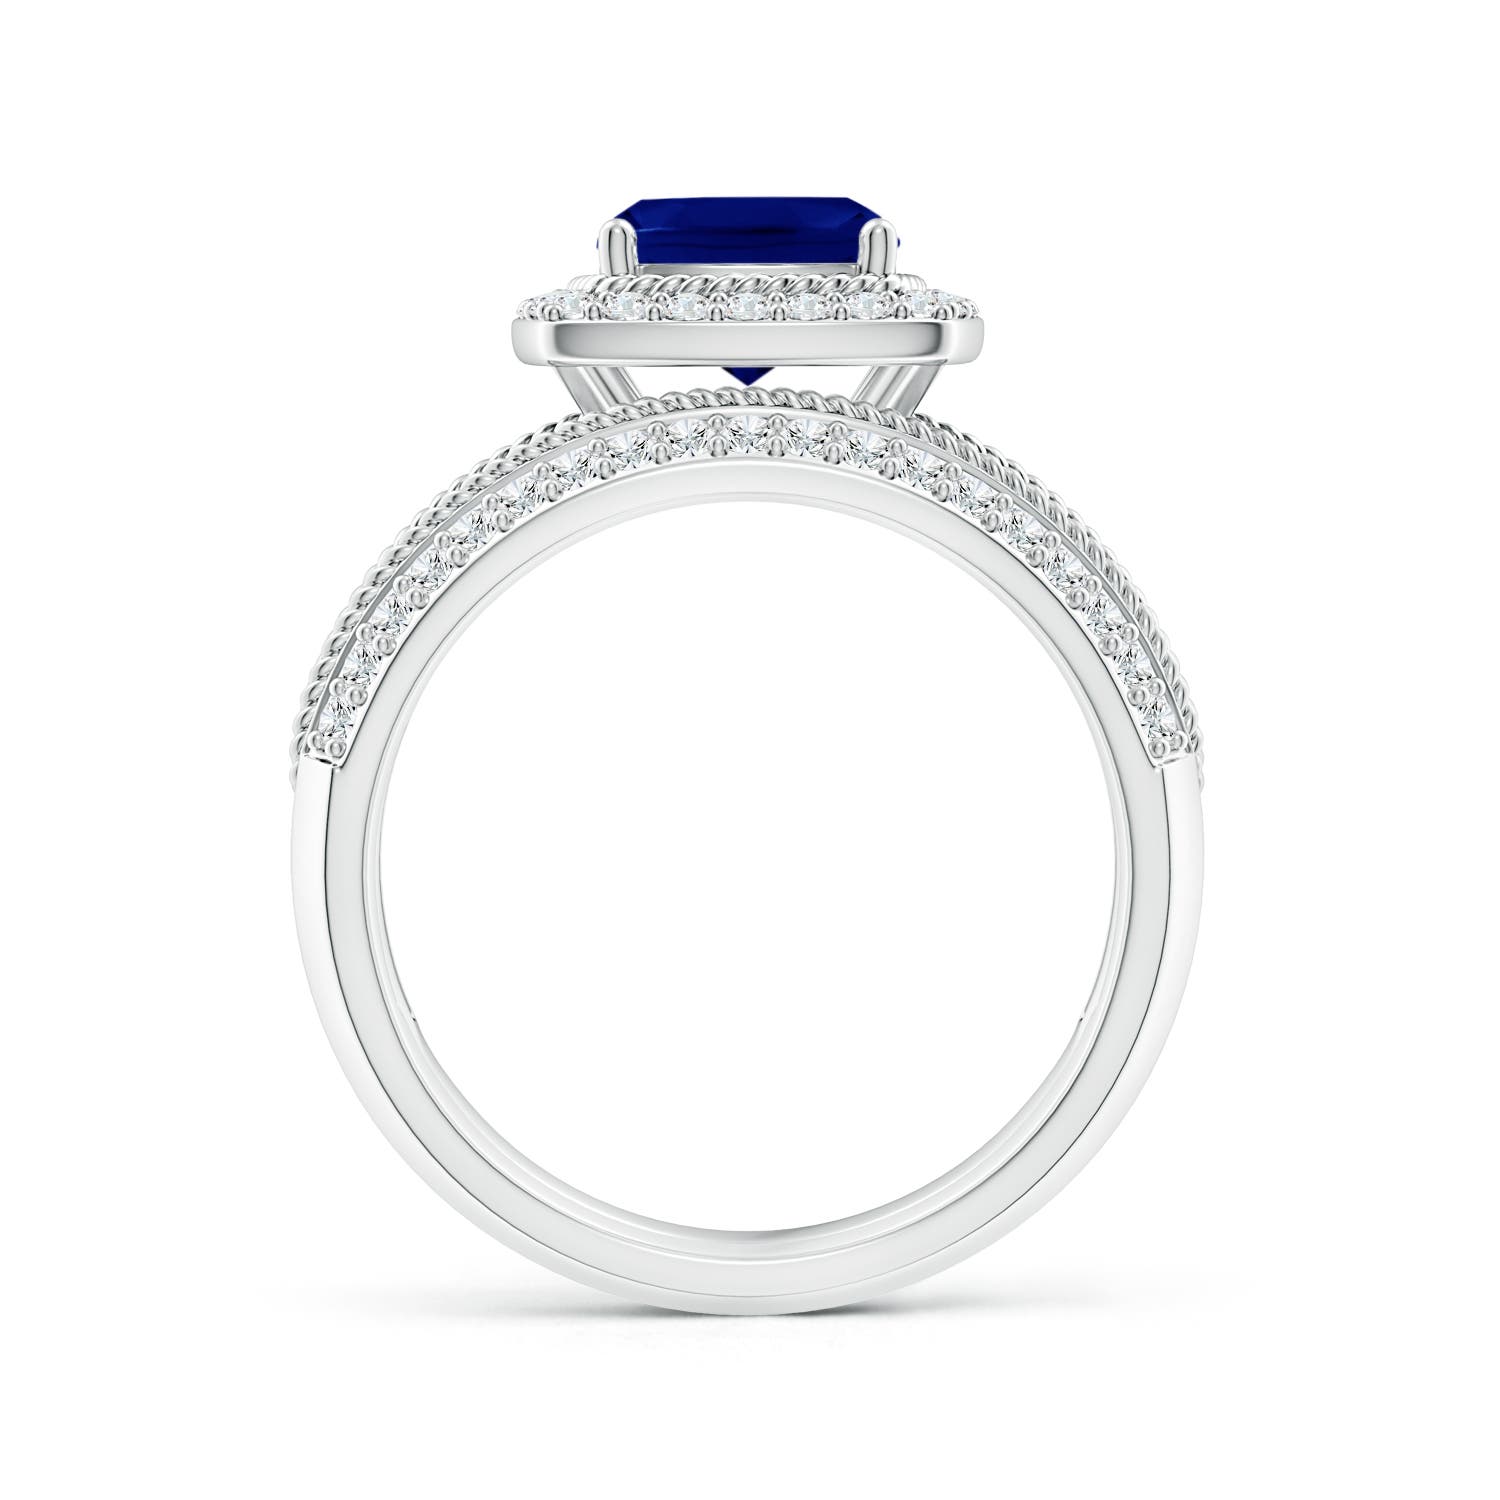 AAA - Blue Sapphire / 2.42 CT / 14 KT White Gold